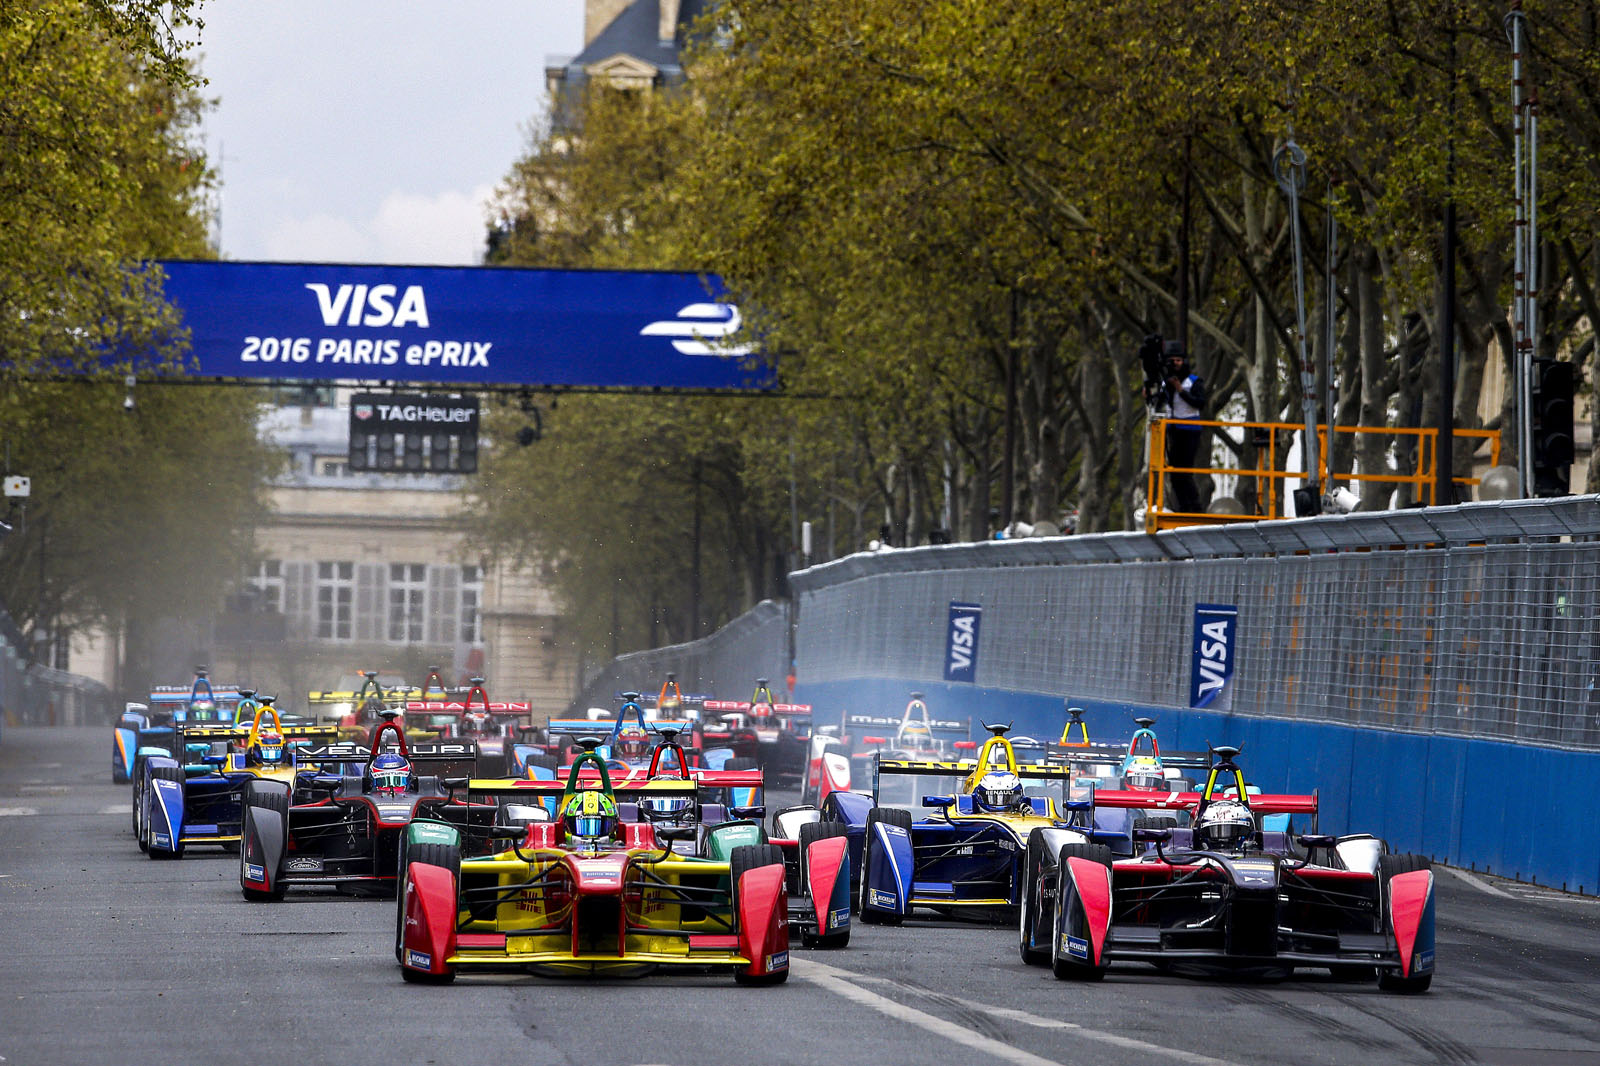 BMW And Nissan Interested In Joining Formula E Grid